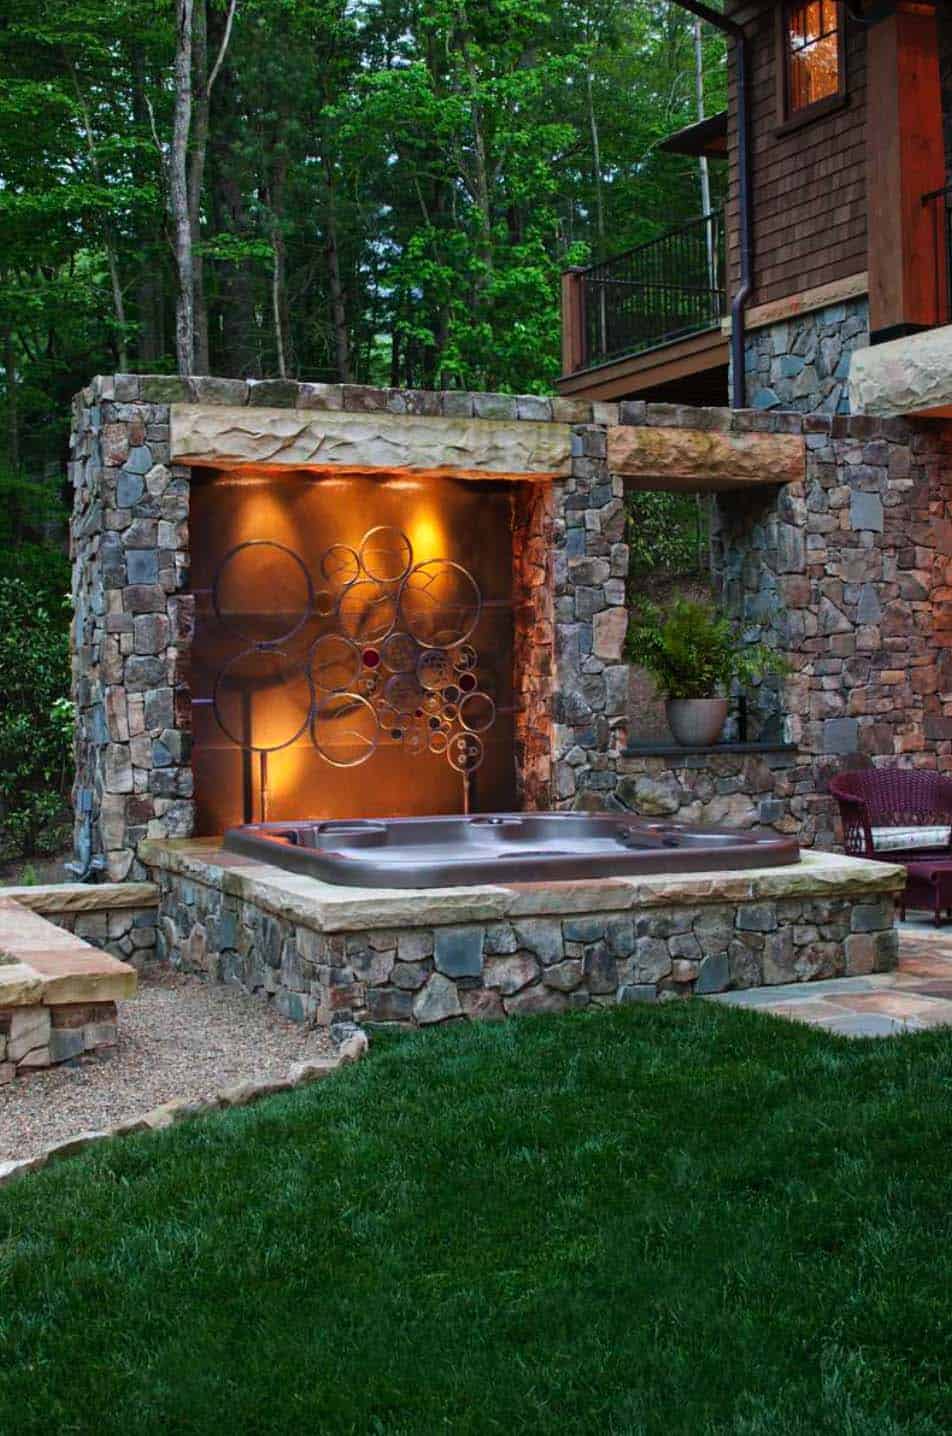 Hot Tub Ideas To Create A Backyard Oasis, Patio With Fireplace And Hot Tub